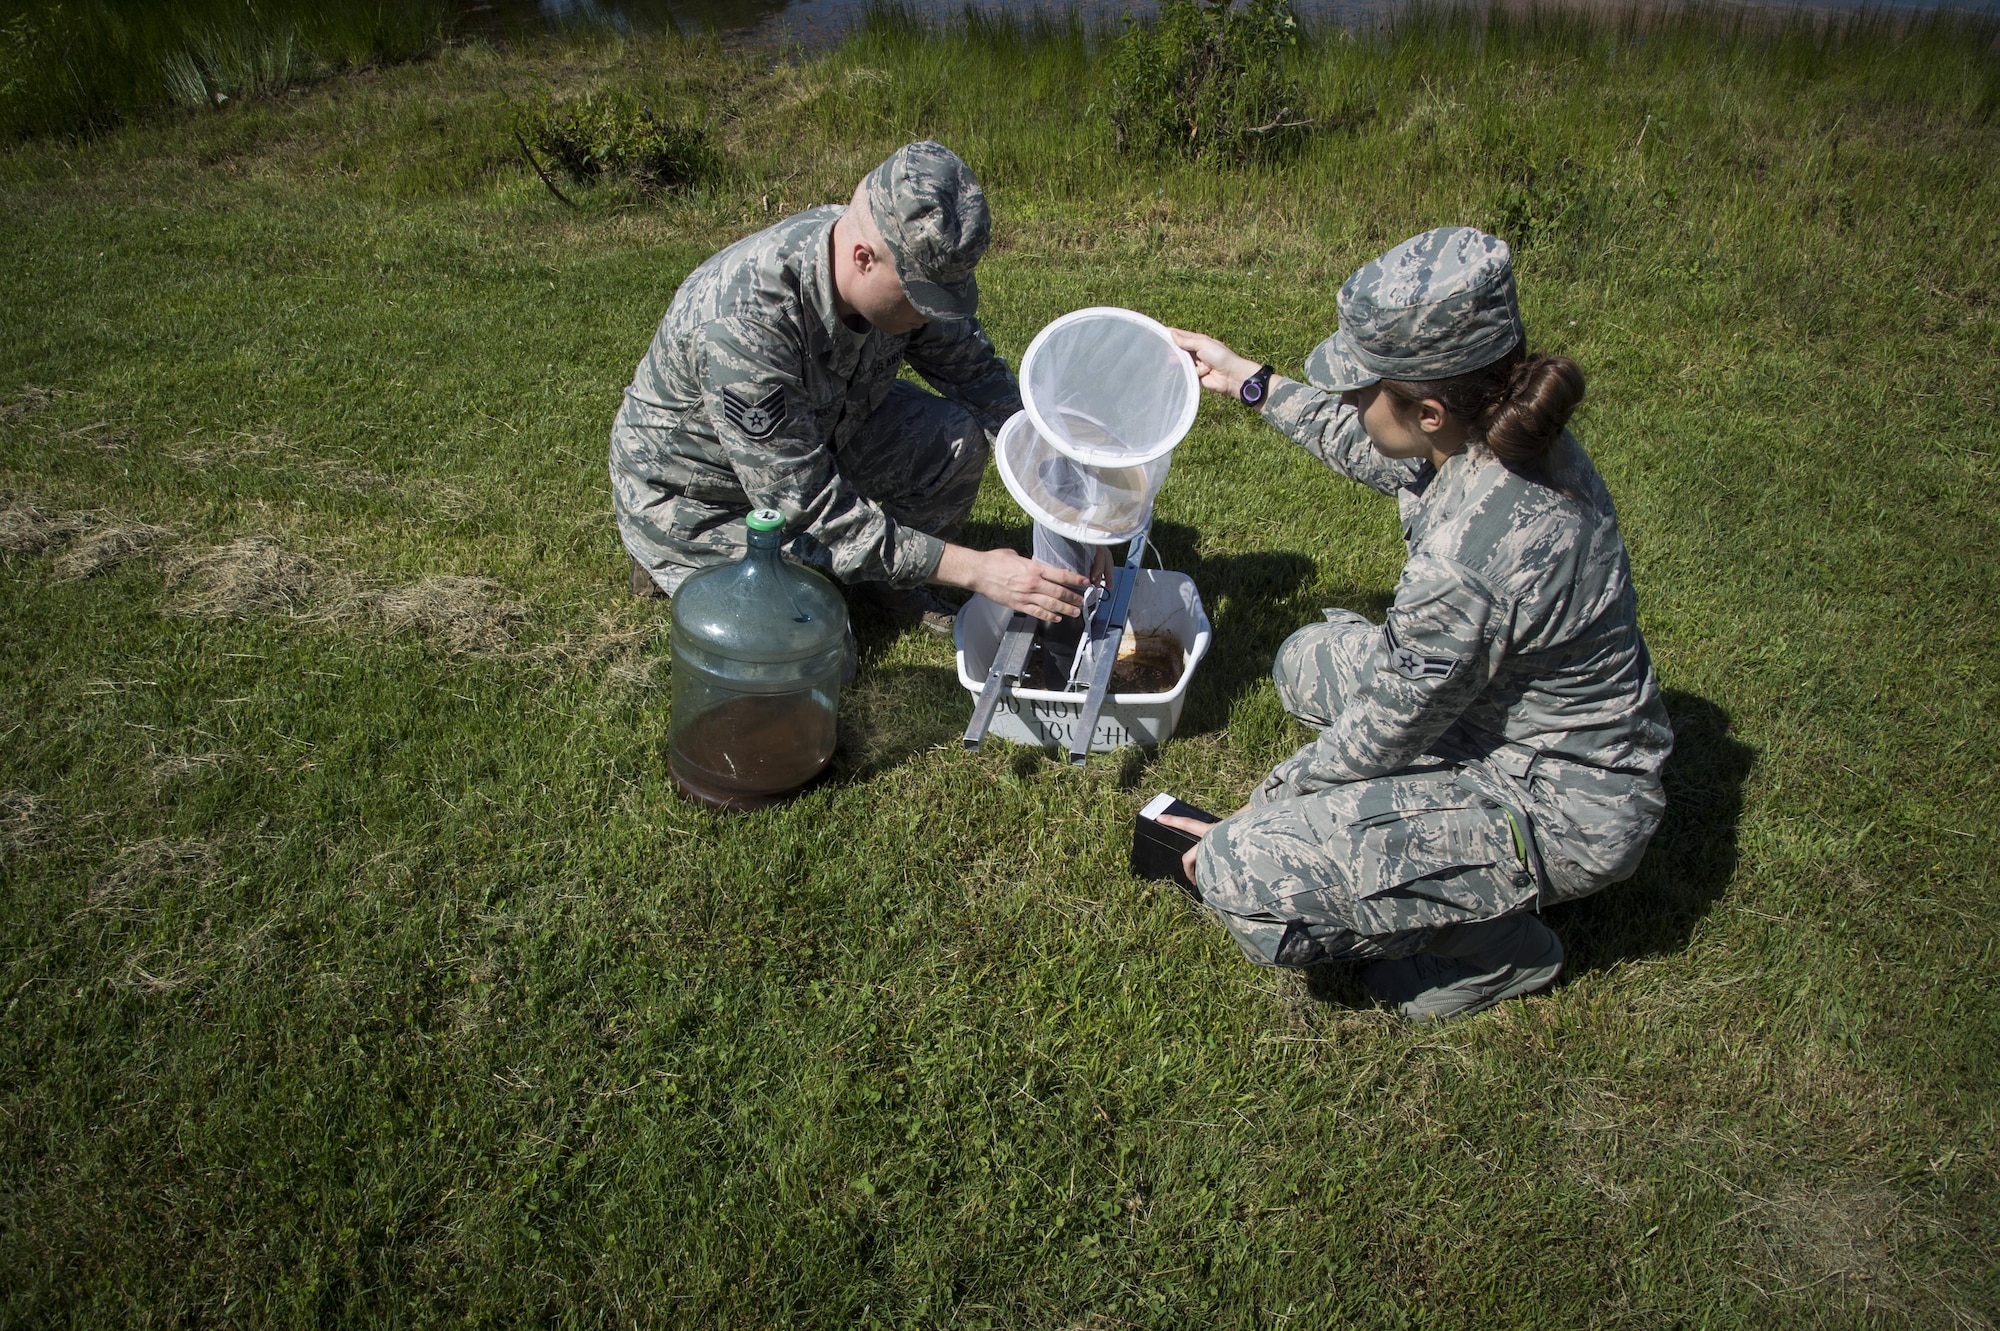 Staff Sgt. Nathan Higgins, 779th Medical Group public health technician, teaches Airman 1st Class Samantha Yordy, 779th MDG public health technician, how to set mosquito traps at the base lake on Joint Base Andrews, Md., June 8, 2017. Airmen from public health set traps about twice a week. (U.S. Air Force photo by Senior Airman Mariah Haddenham)